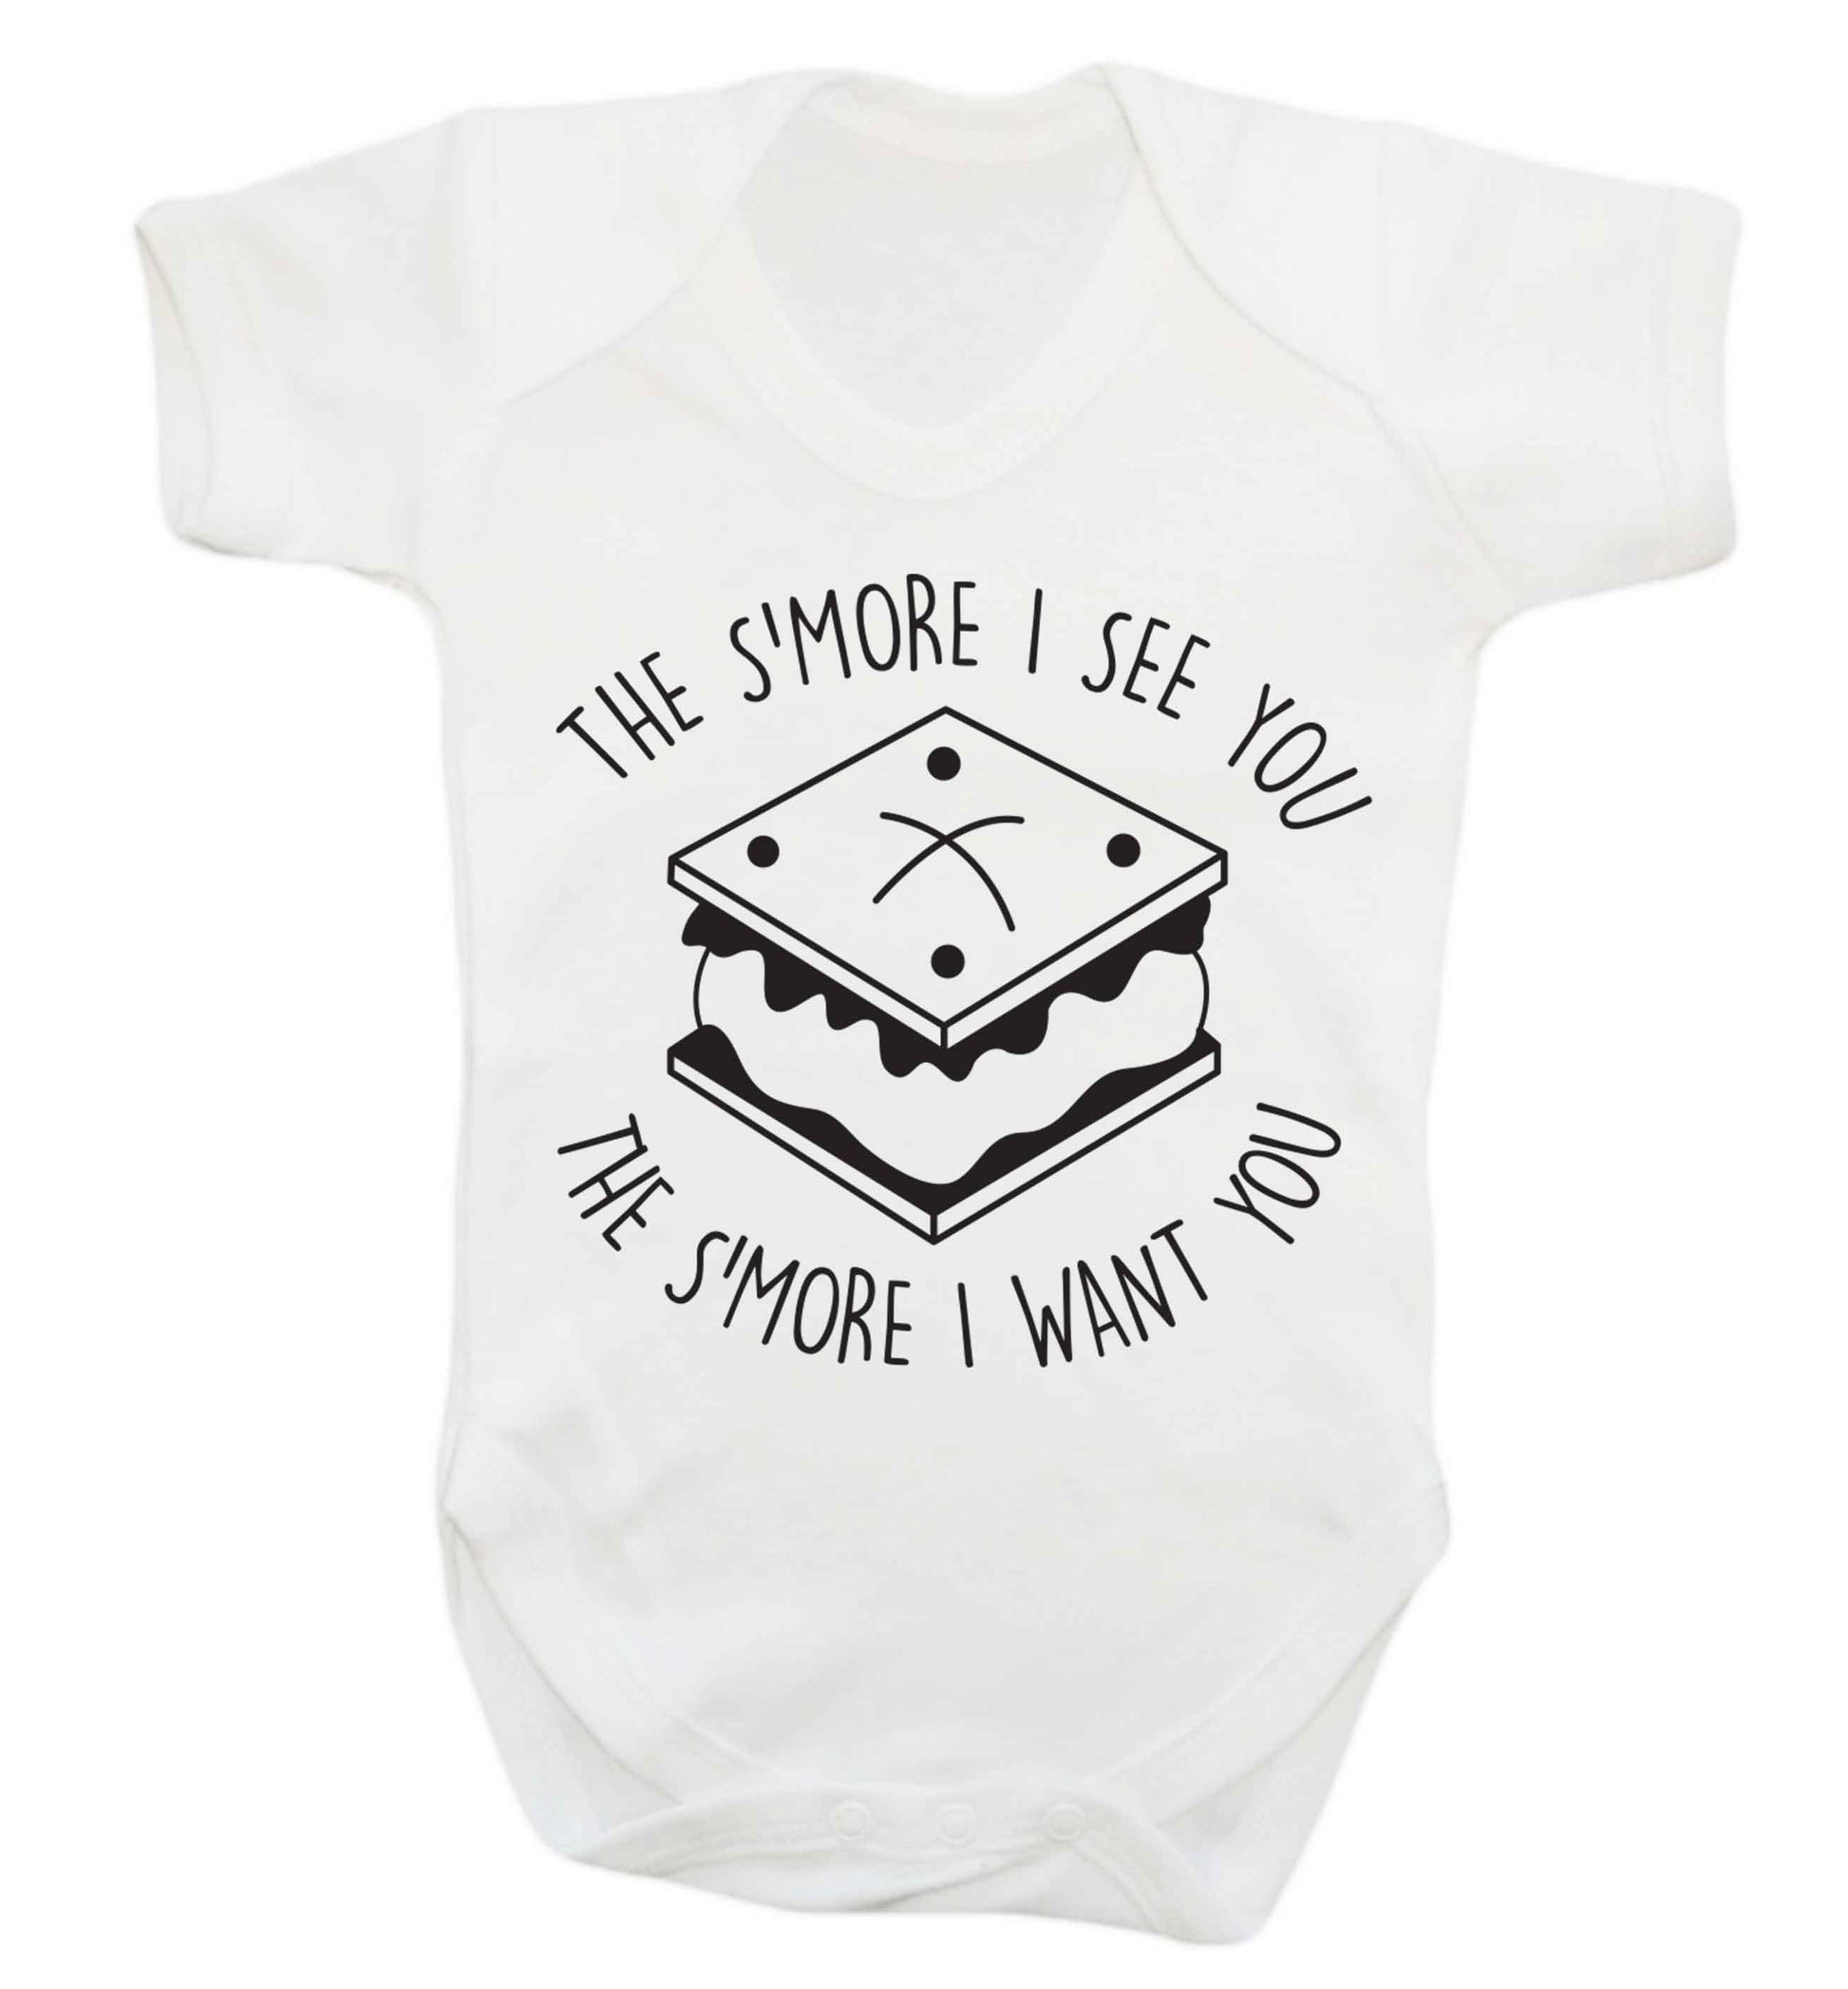 The s'more I see you the s'more I want you Baby Vest white 18-24 months